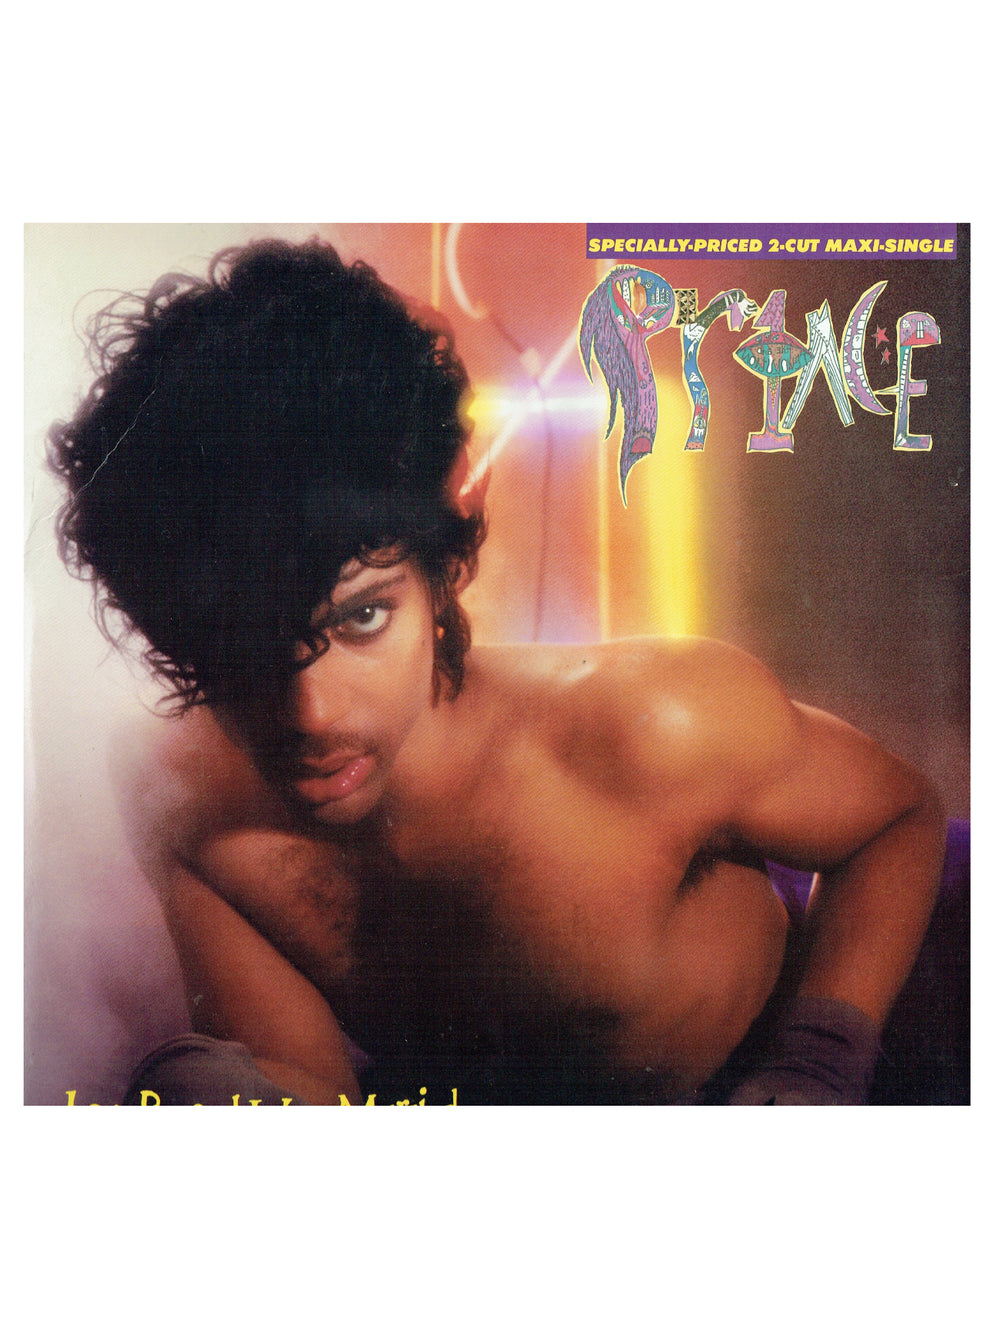 Prince – Let's Pretend We're Married Were Married Vinyl 12" Maxi-Single Canada Preloved: 1983